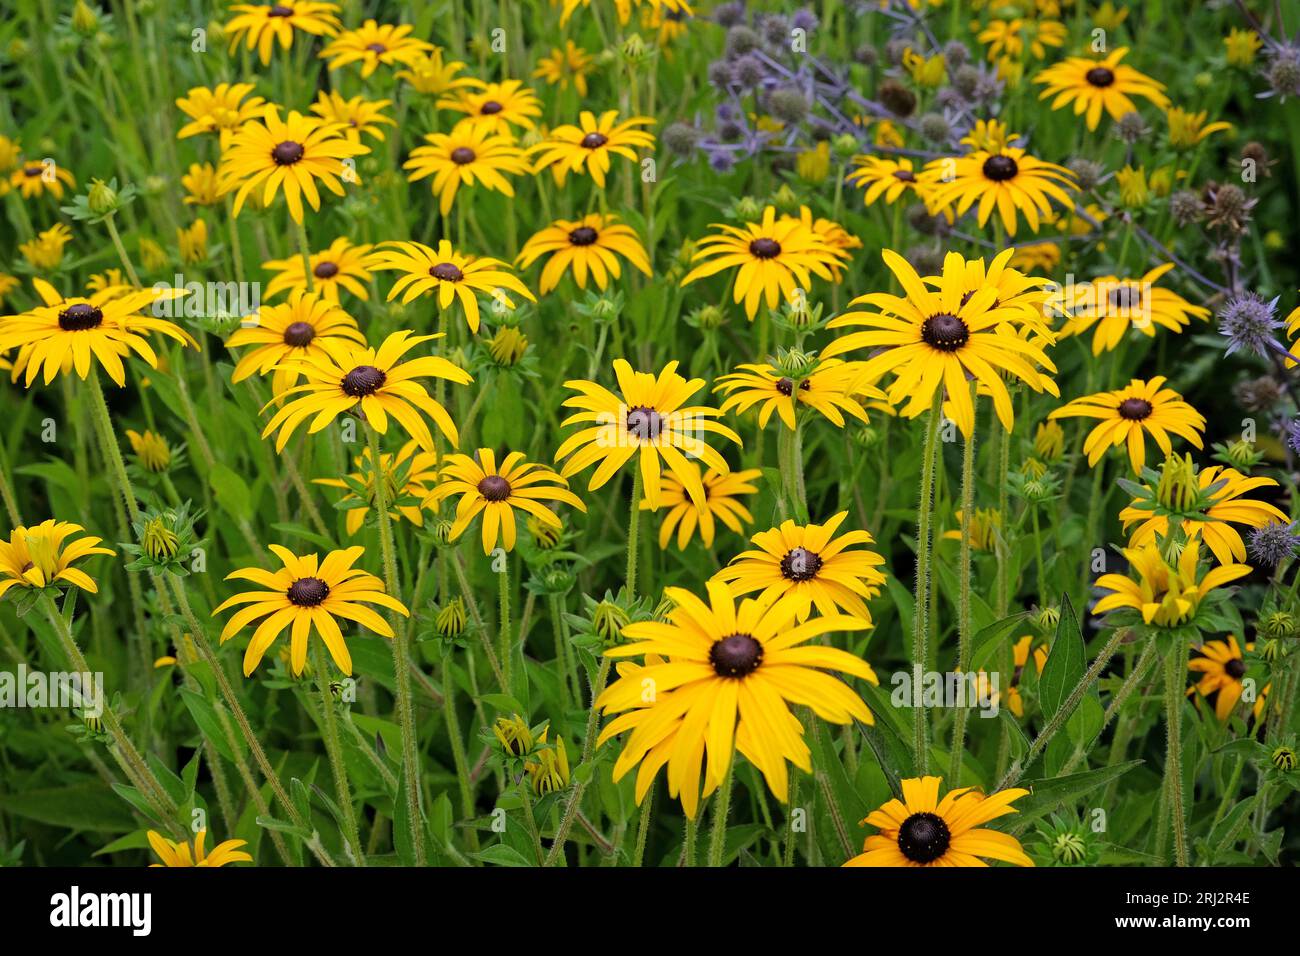 Rudbeckia fulgida, commonly known as Deam's coneflower or Black Eyed Susan, in flower. Stock Photo